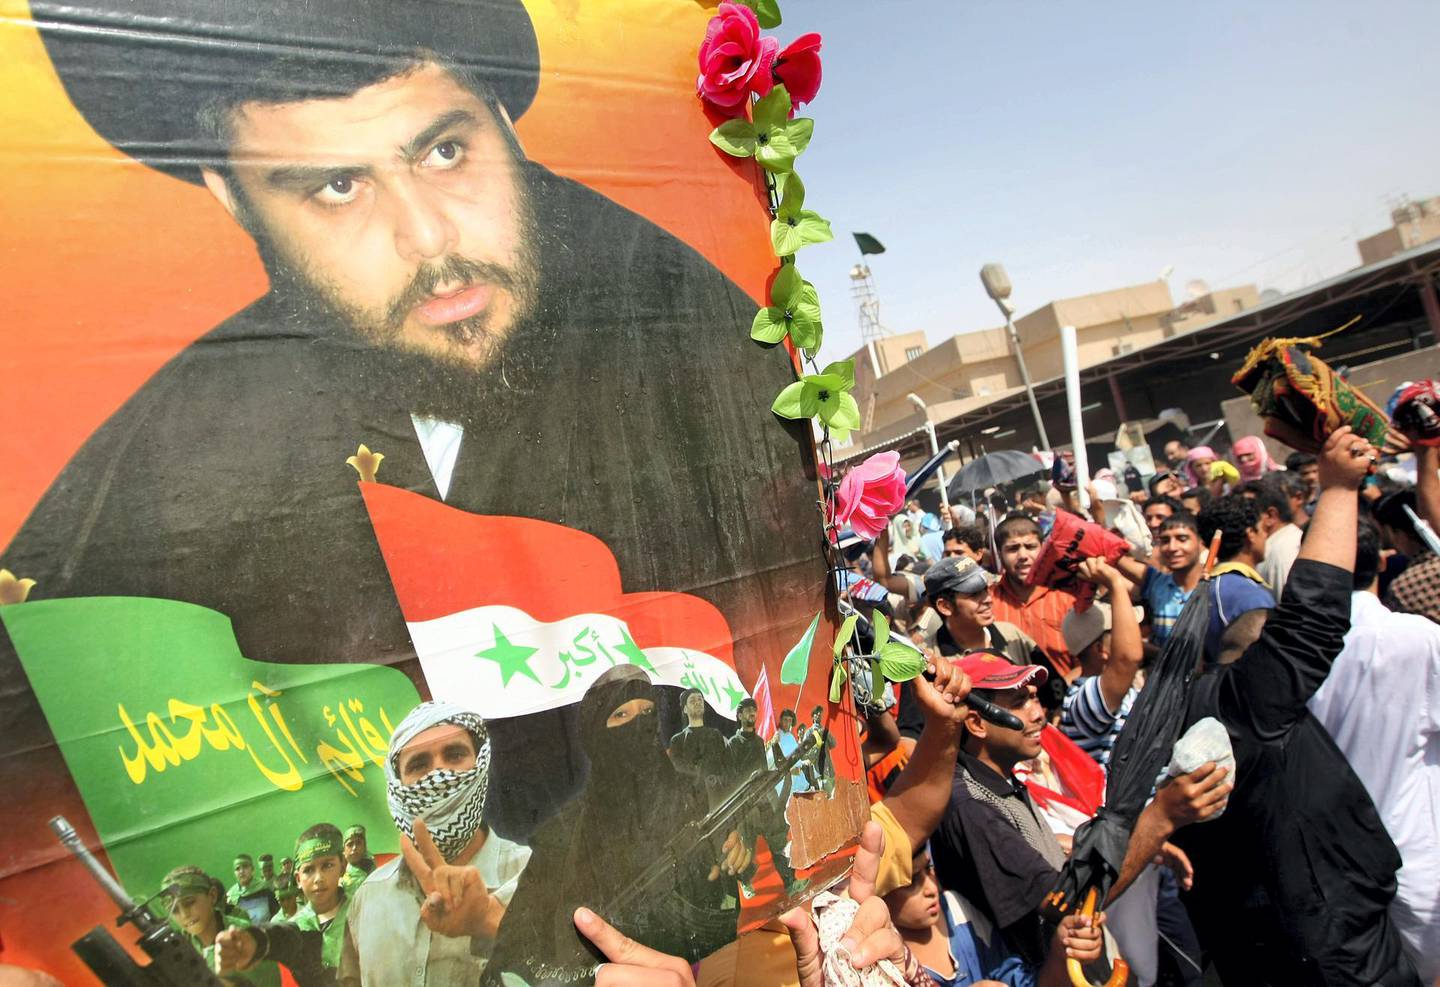 Shiite Muslims protest close to an image of anti-US cleric Moqtada al-Sadr during a protest following Friday noon prayers in the impoverished Sadr City neighborhood of eastern Baghdad on September 19 2008. The weekly Friday prayers have recently been followed by protests in support of radical cleric Moqtada al-Sadr and against the occupying US forces.  AFP PHOTO/AHMAD AL-RUBAYE
 / AFP PHOTO / AHMAD AL-RUBAYE